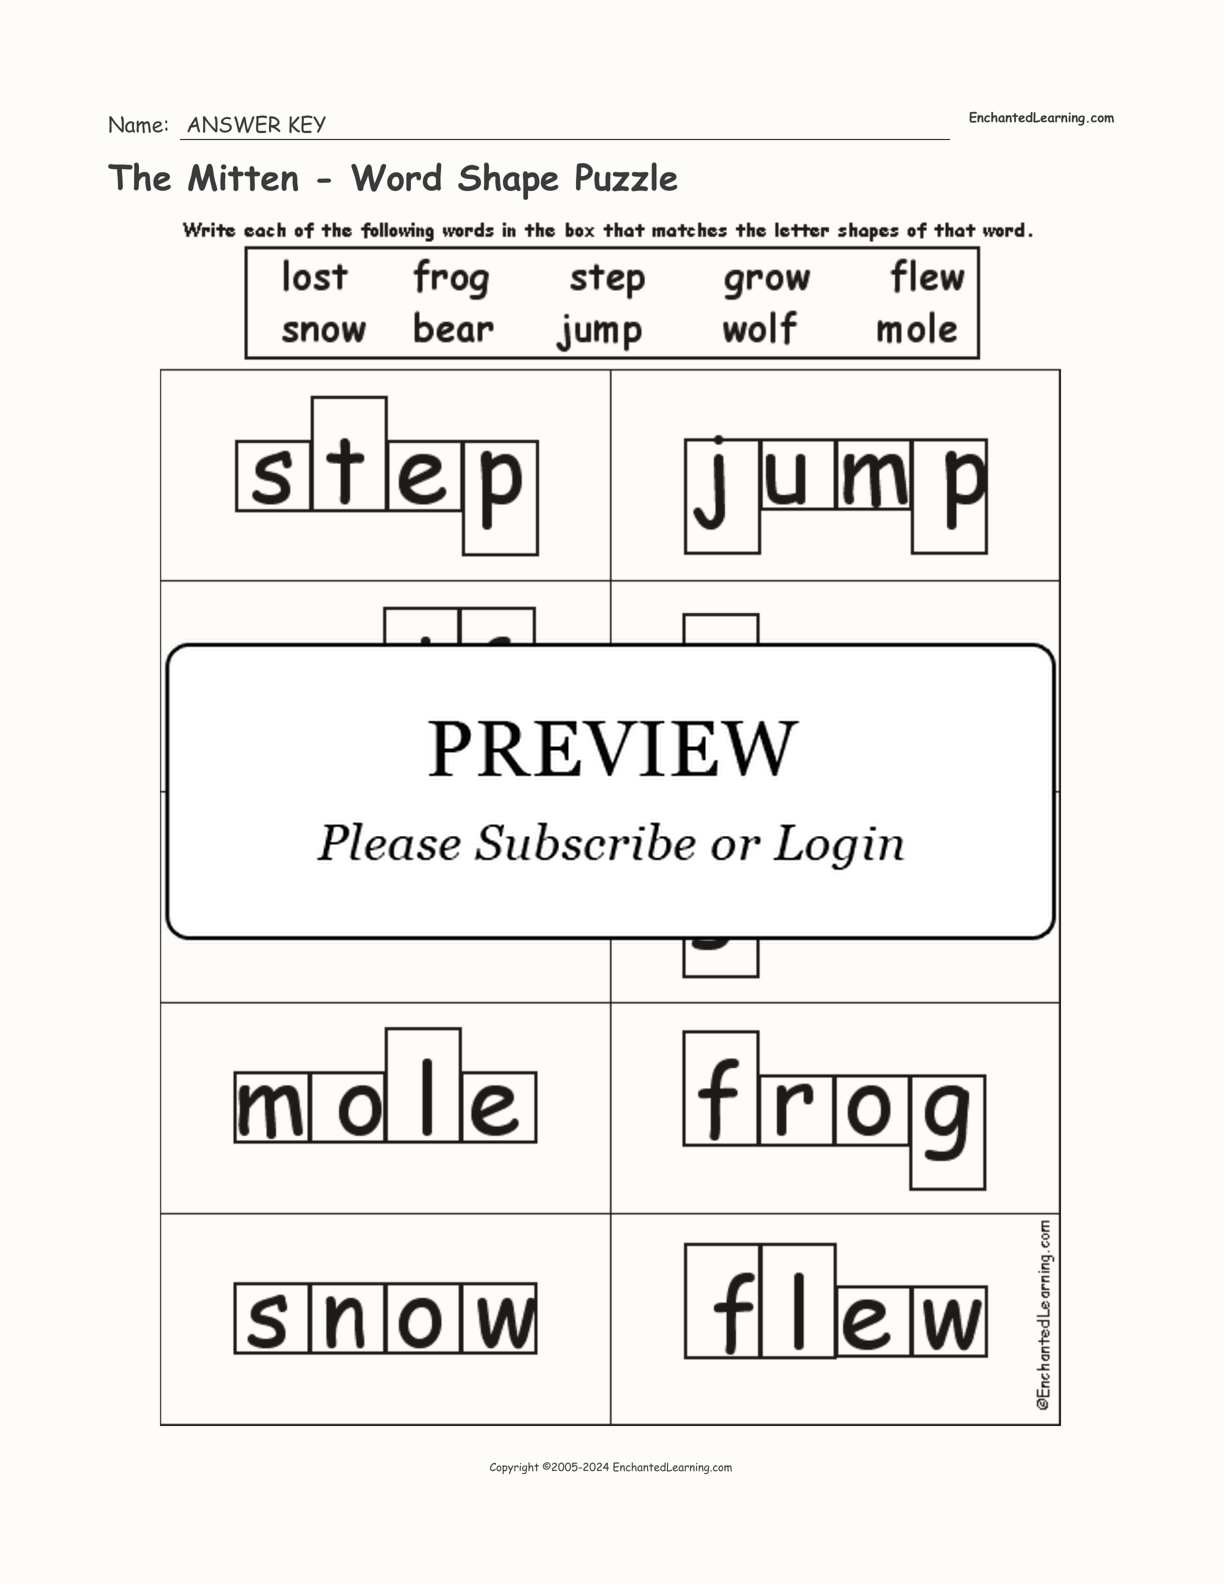 The Mitten - Word Shape Puzzle interactive worksheet page 2